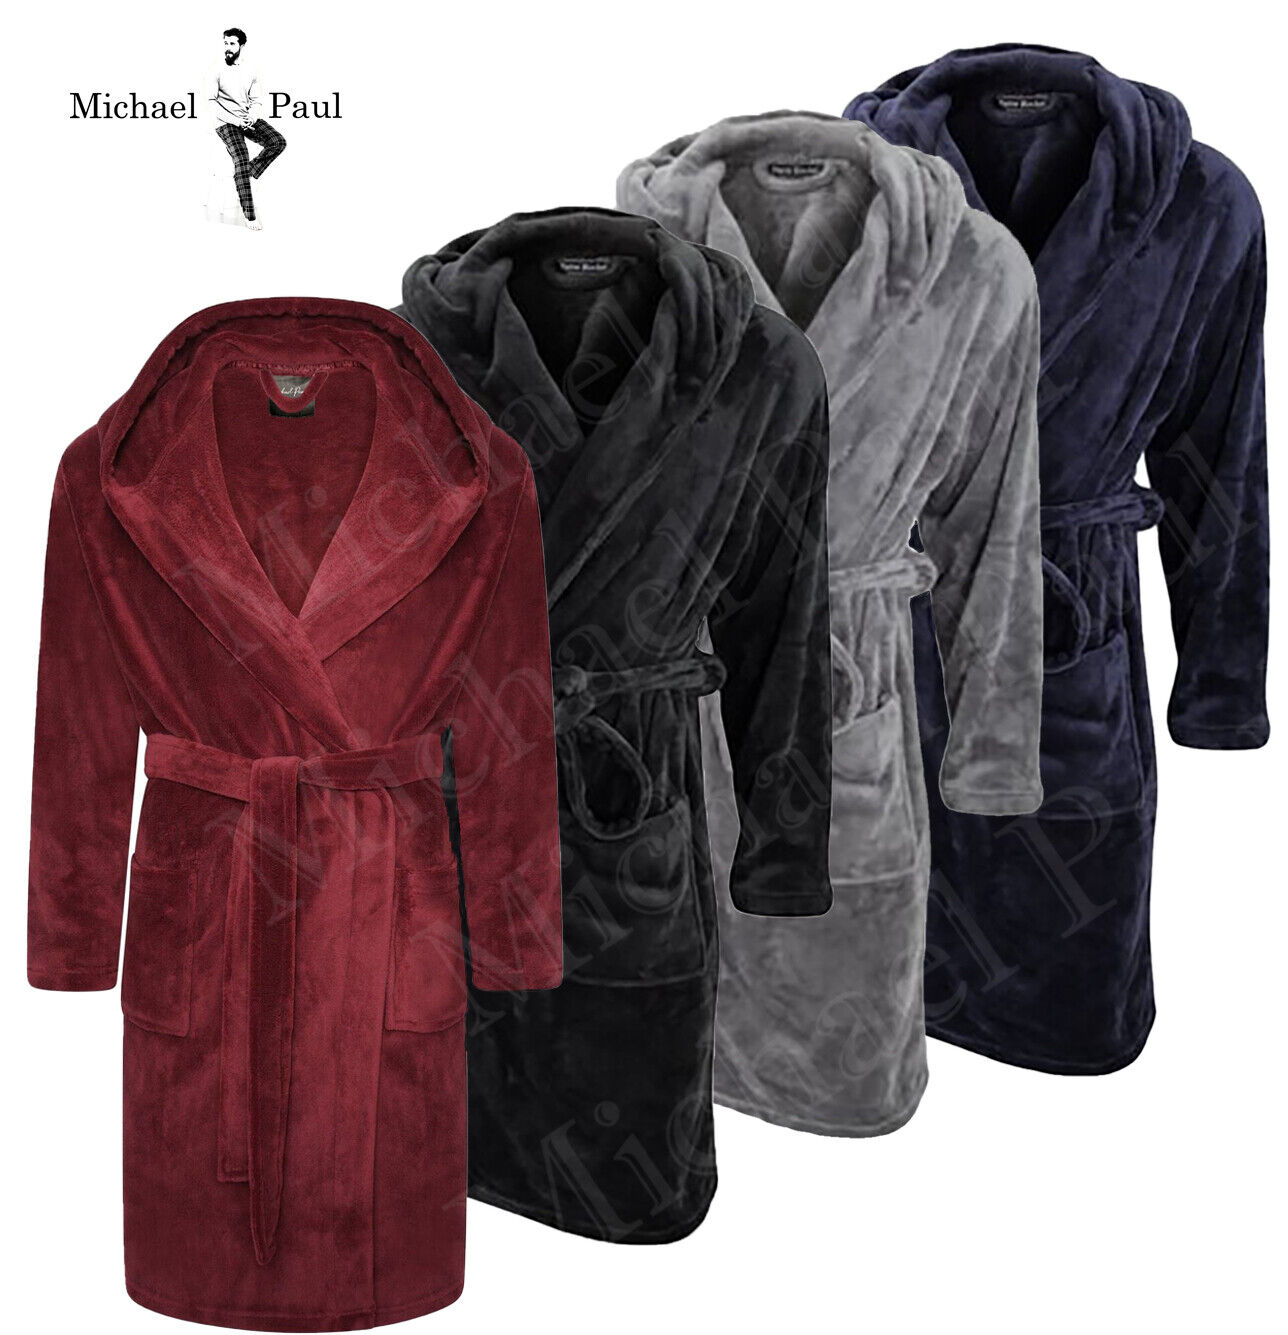 MICHAEL PAUL MENS DRESSING GOWN HOODED SUPER SOFT&COSY FLEECE ROBE SIZES M-5XL